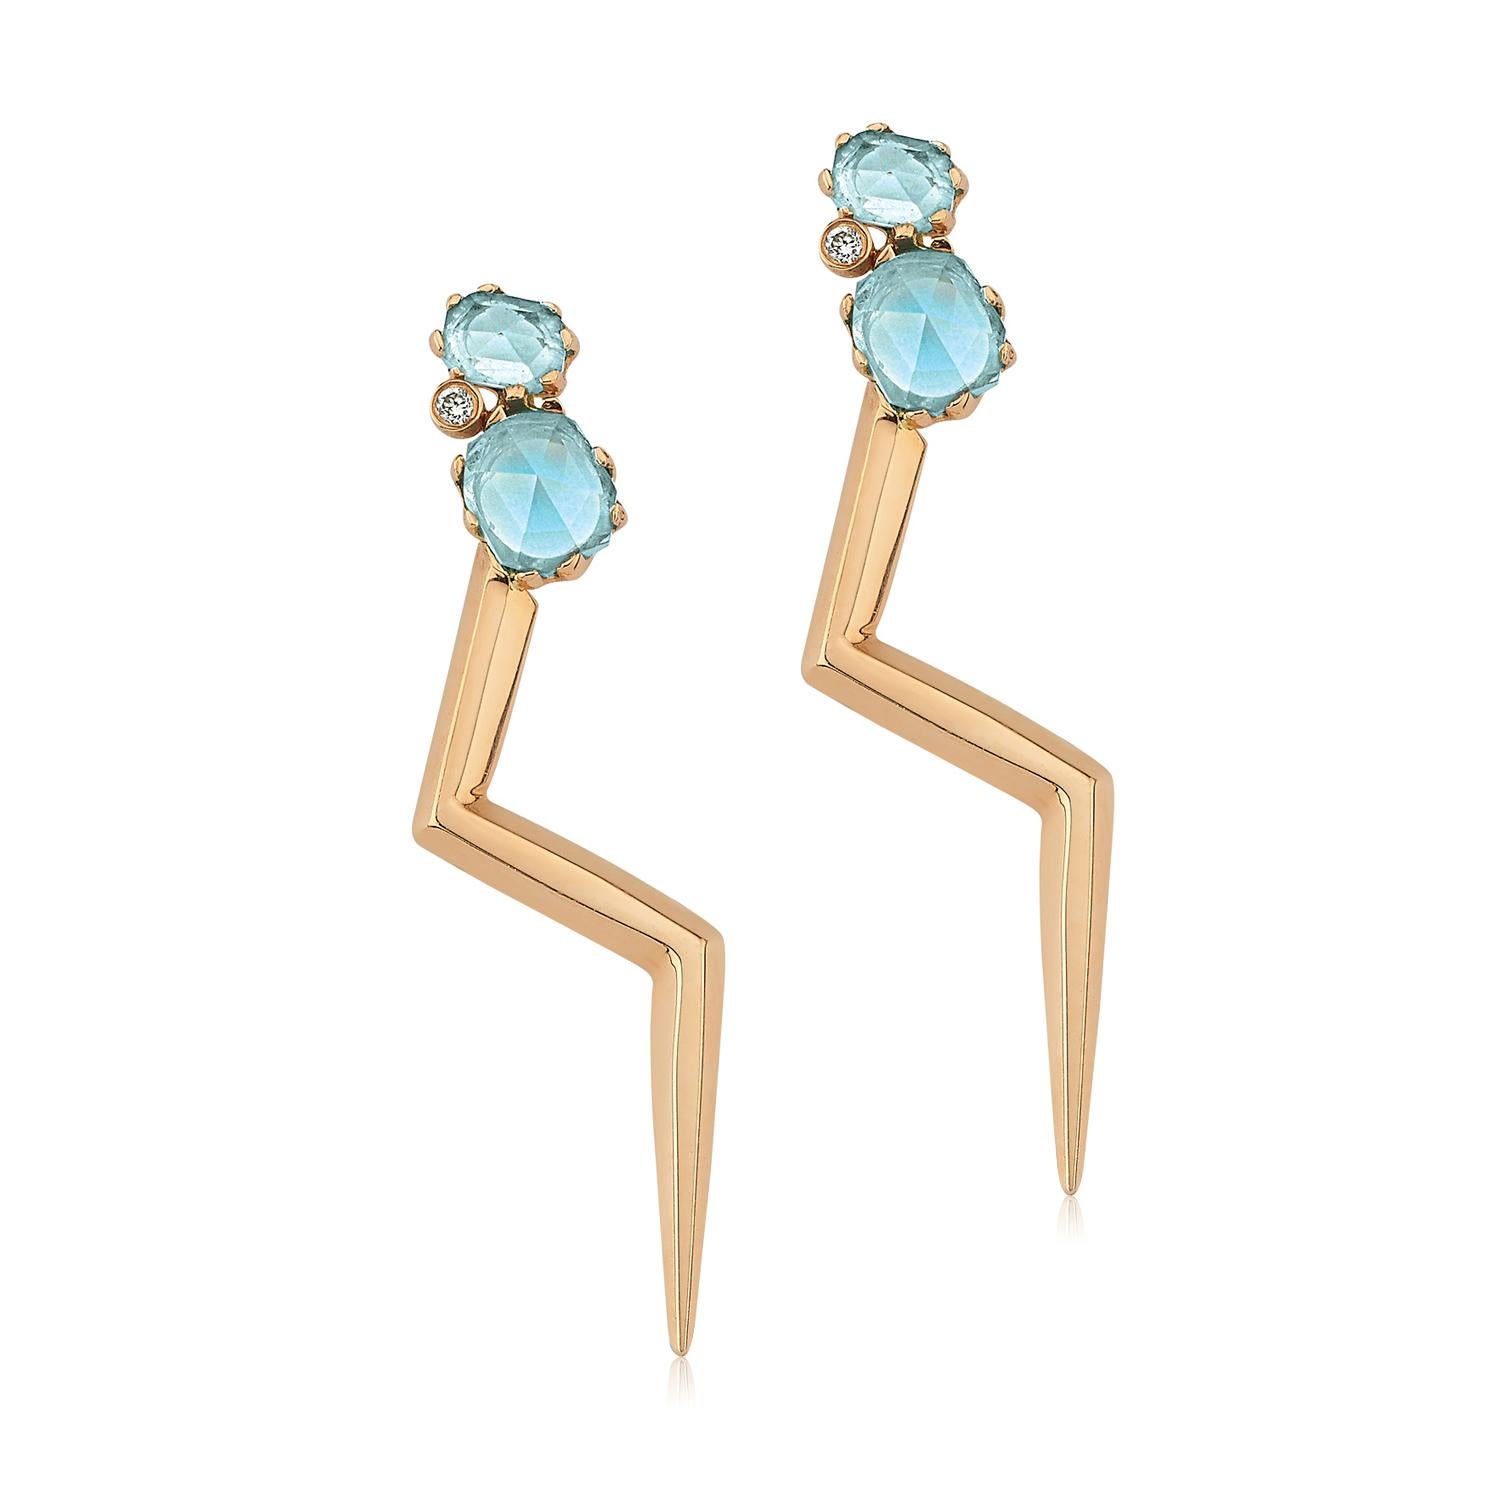 The Thunder Collection represents the power within yourself as the lightning design has always had a deep and strong meaning in history and legends. 

2 Blue topaz lightning earring with white diamond (single) in 14k rose gold by selda